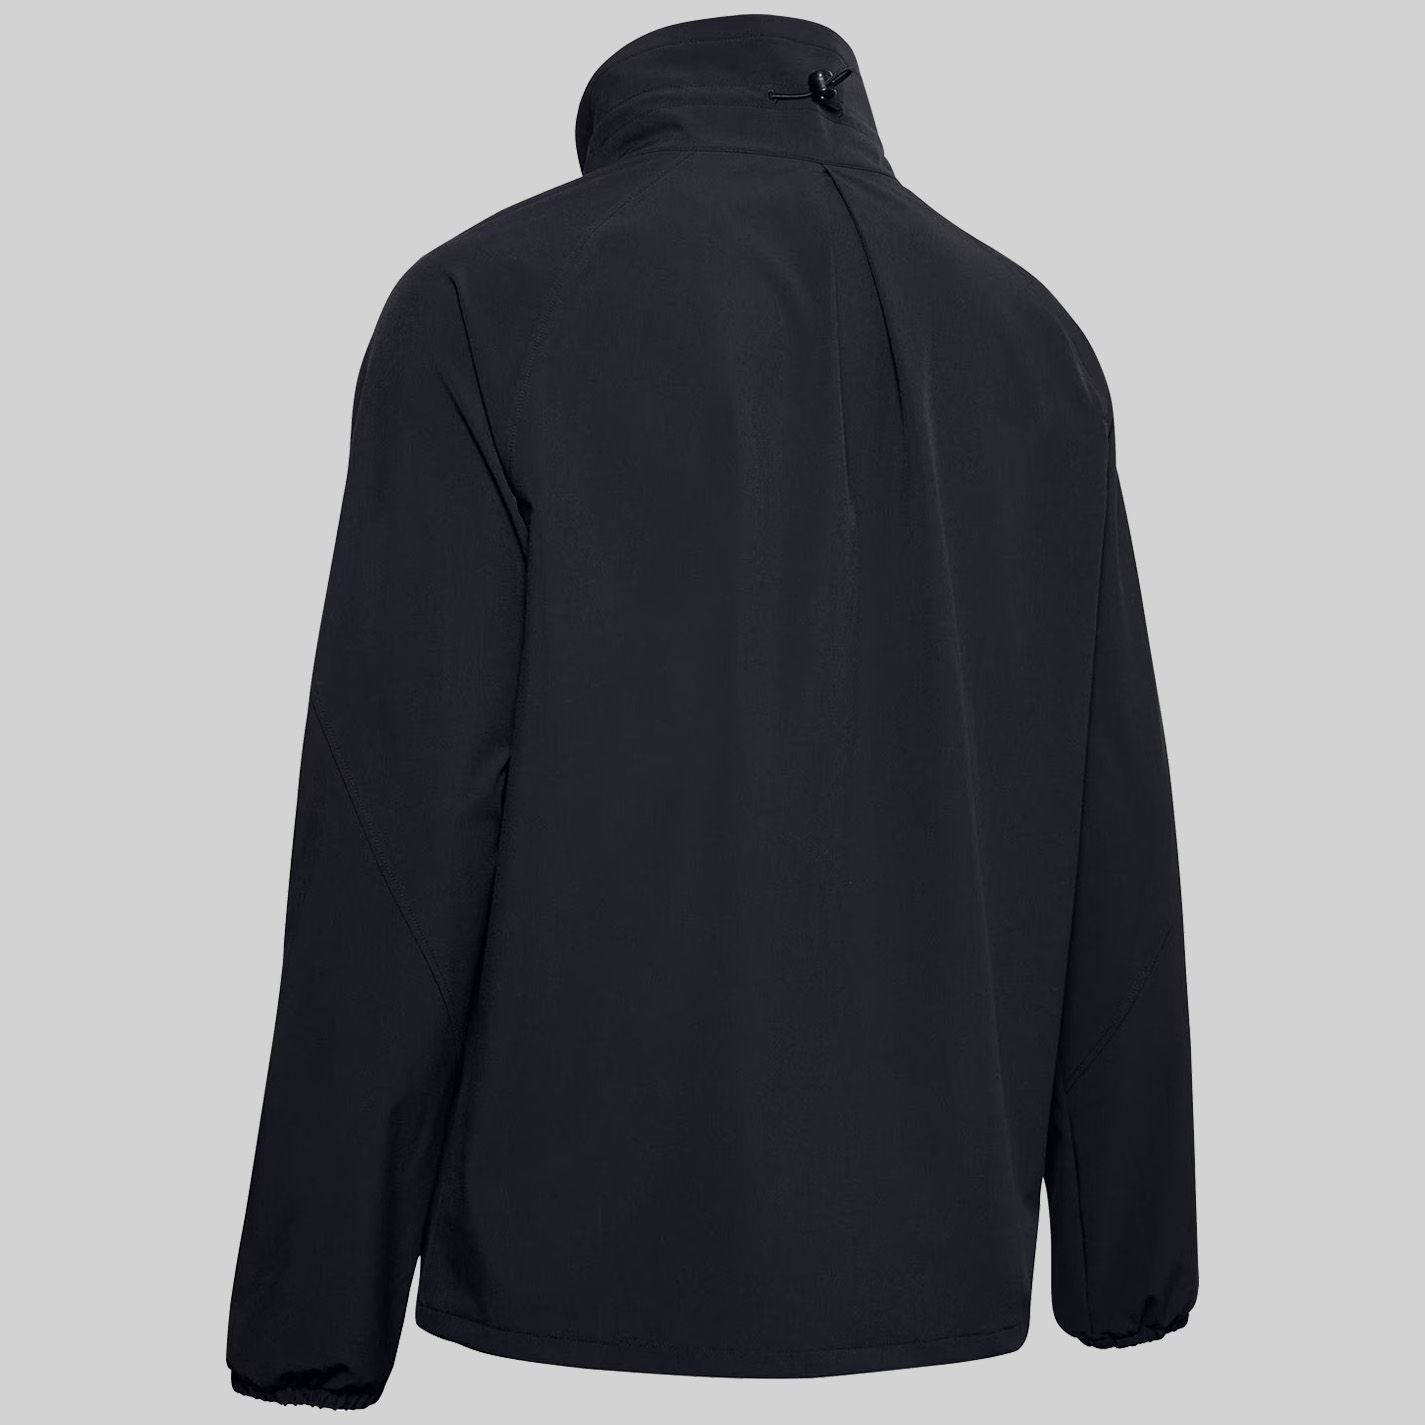 Womens Under Armour Woven Jacket